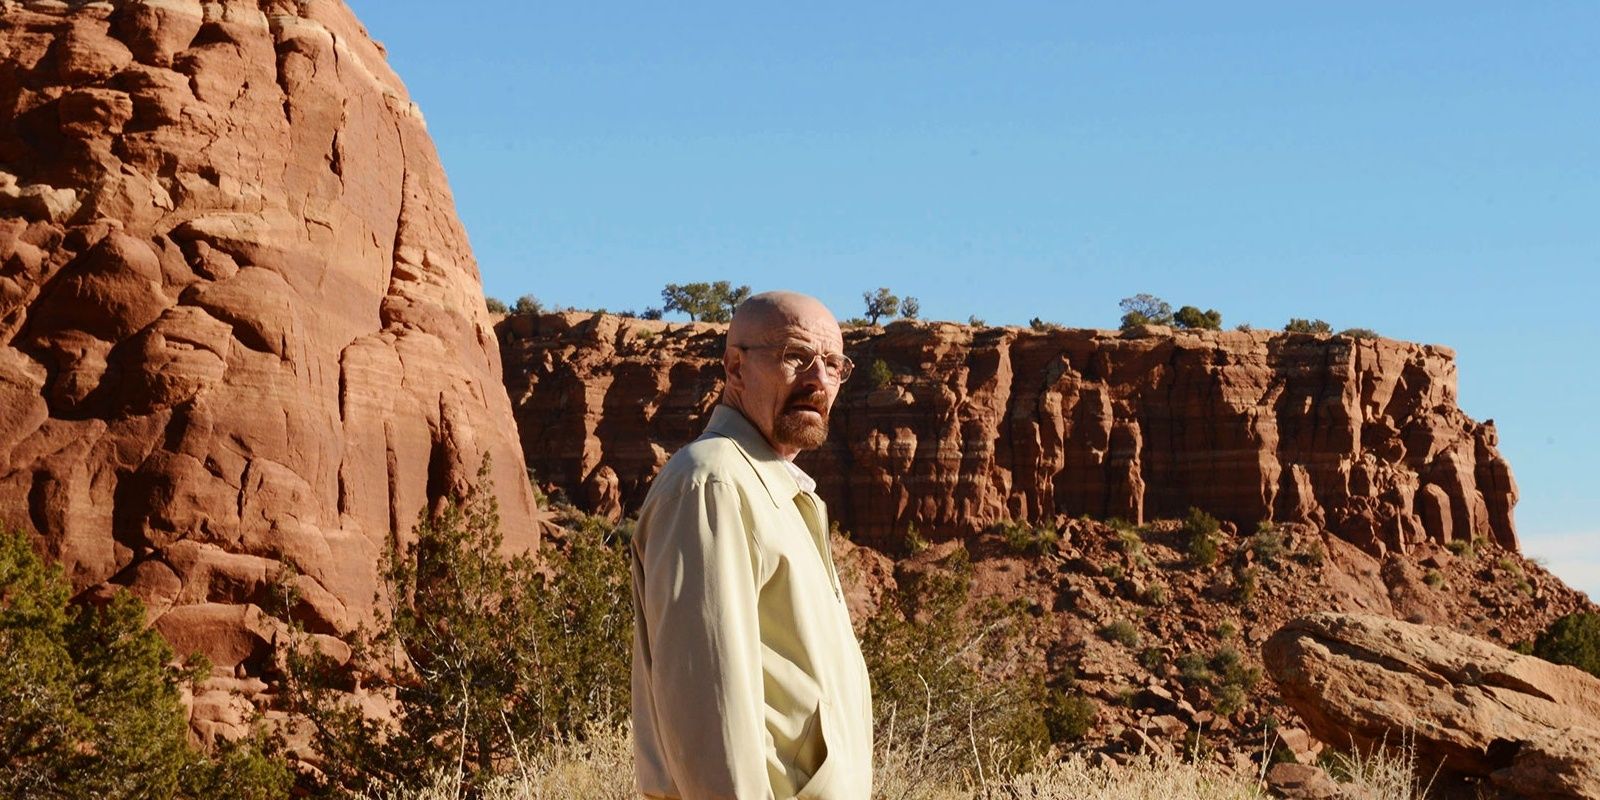 Walter White stands alone in the desert in Breaking Bad.